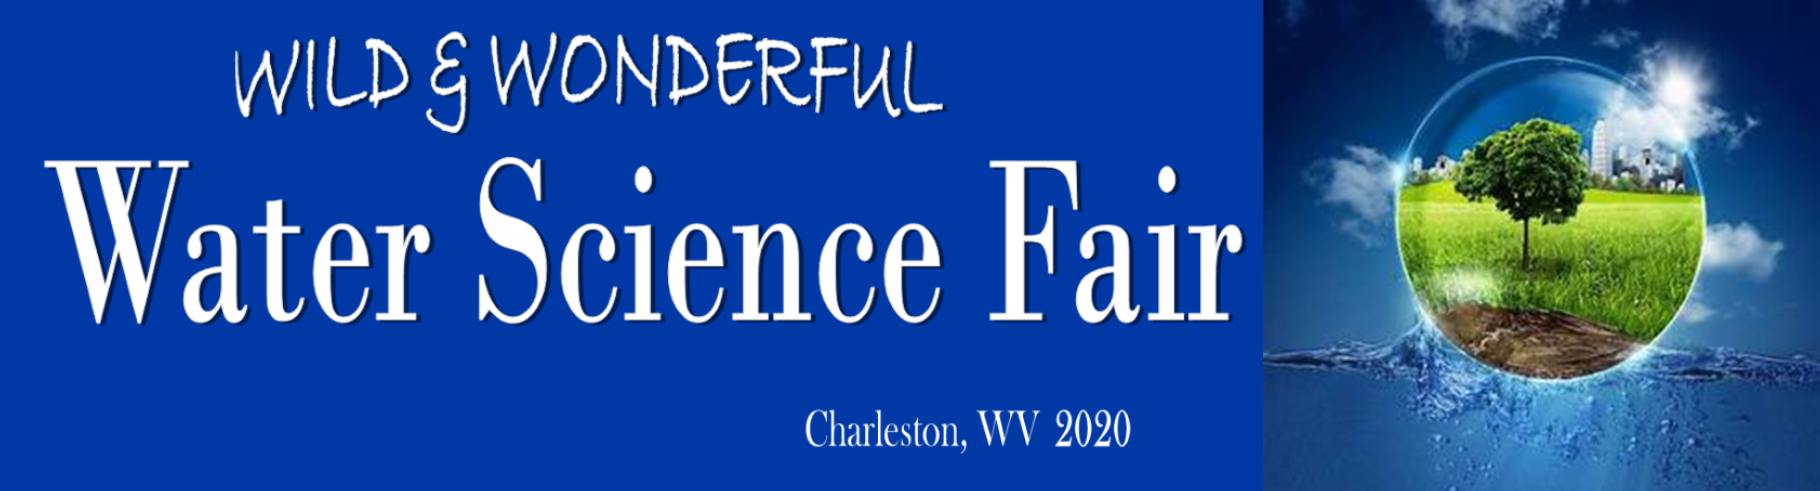 Wild and Wonderful Water Science Fair Banner